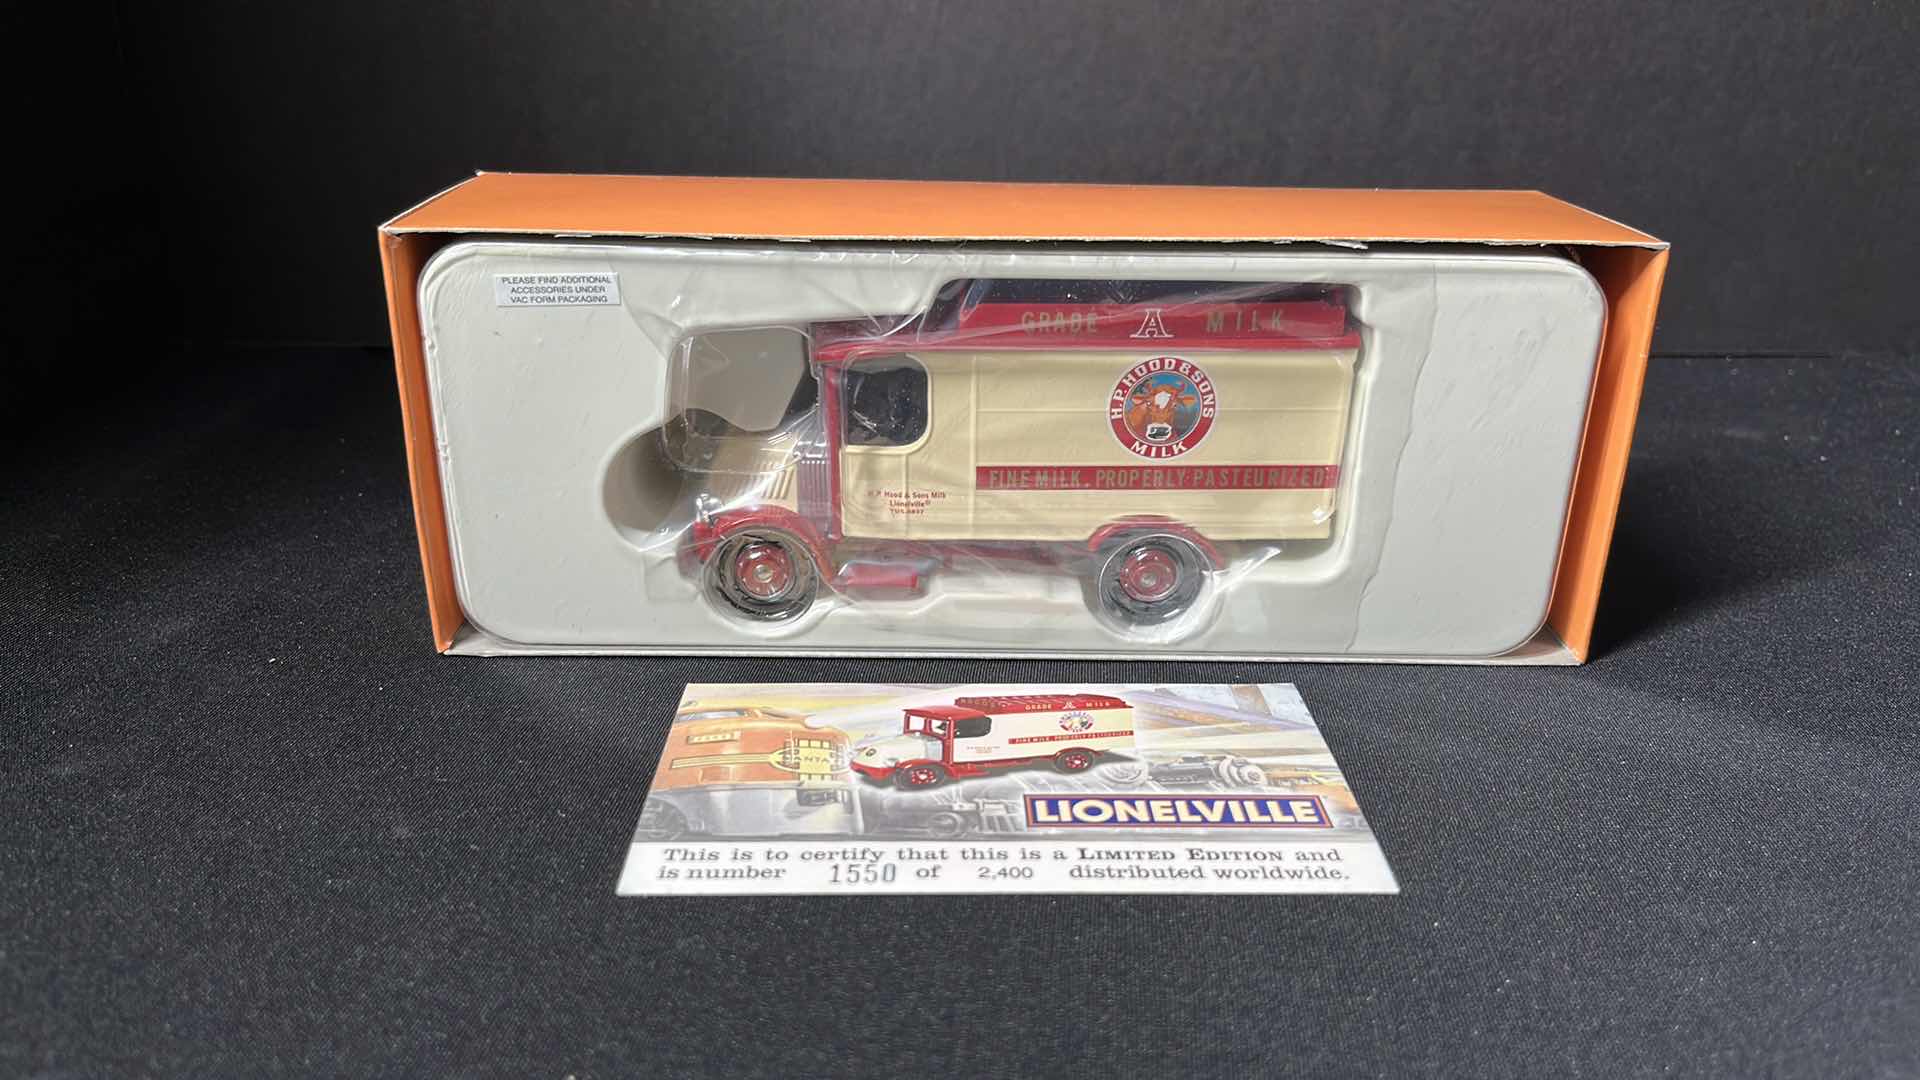 Photo 1 of CORGI CLASSICS INC, LIONELVILLE LIMITED EDITION DIE-CAST REPLICA MACK AC DELIVERY TRUCK H.P. HOOD & SONS MILK US50602
$50